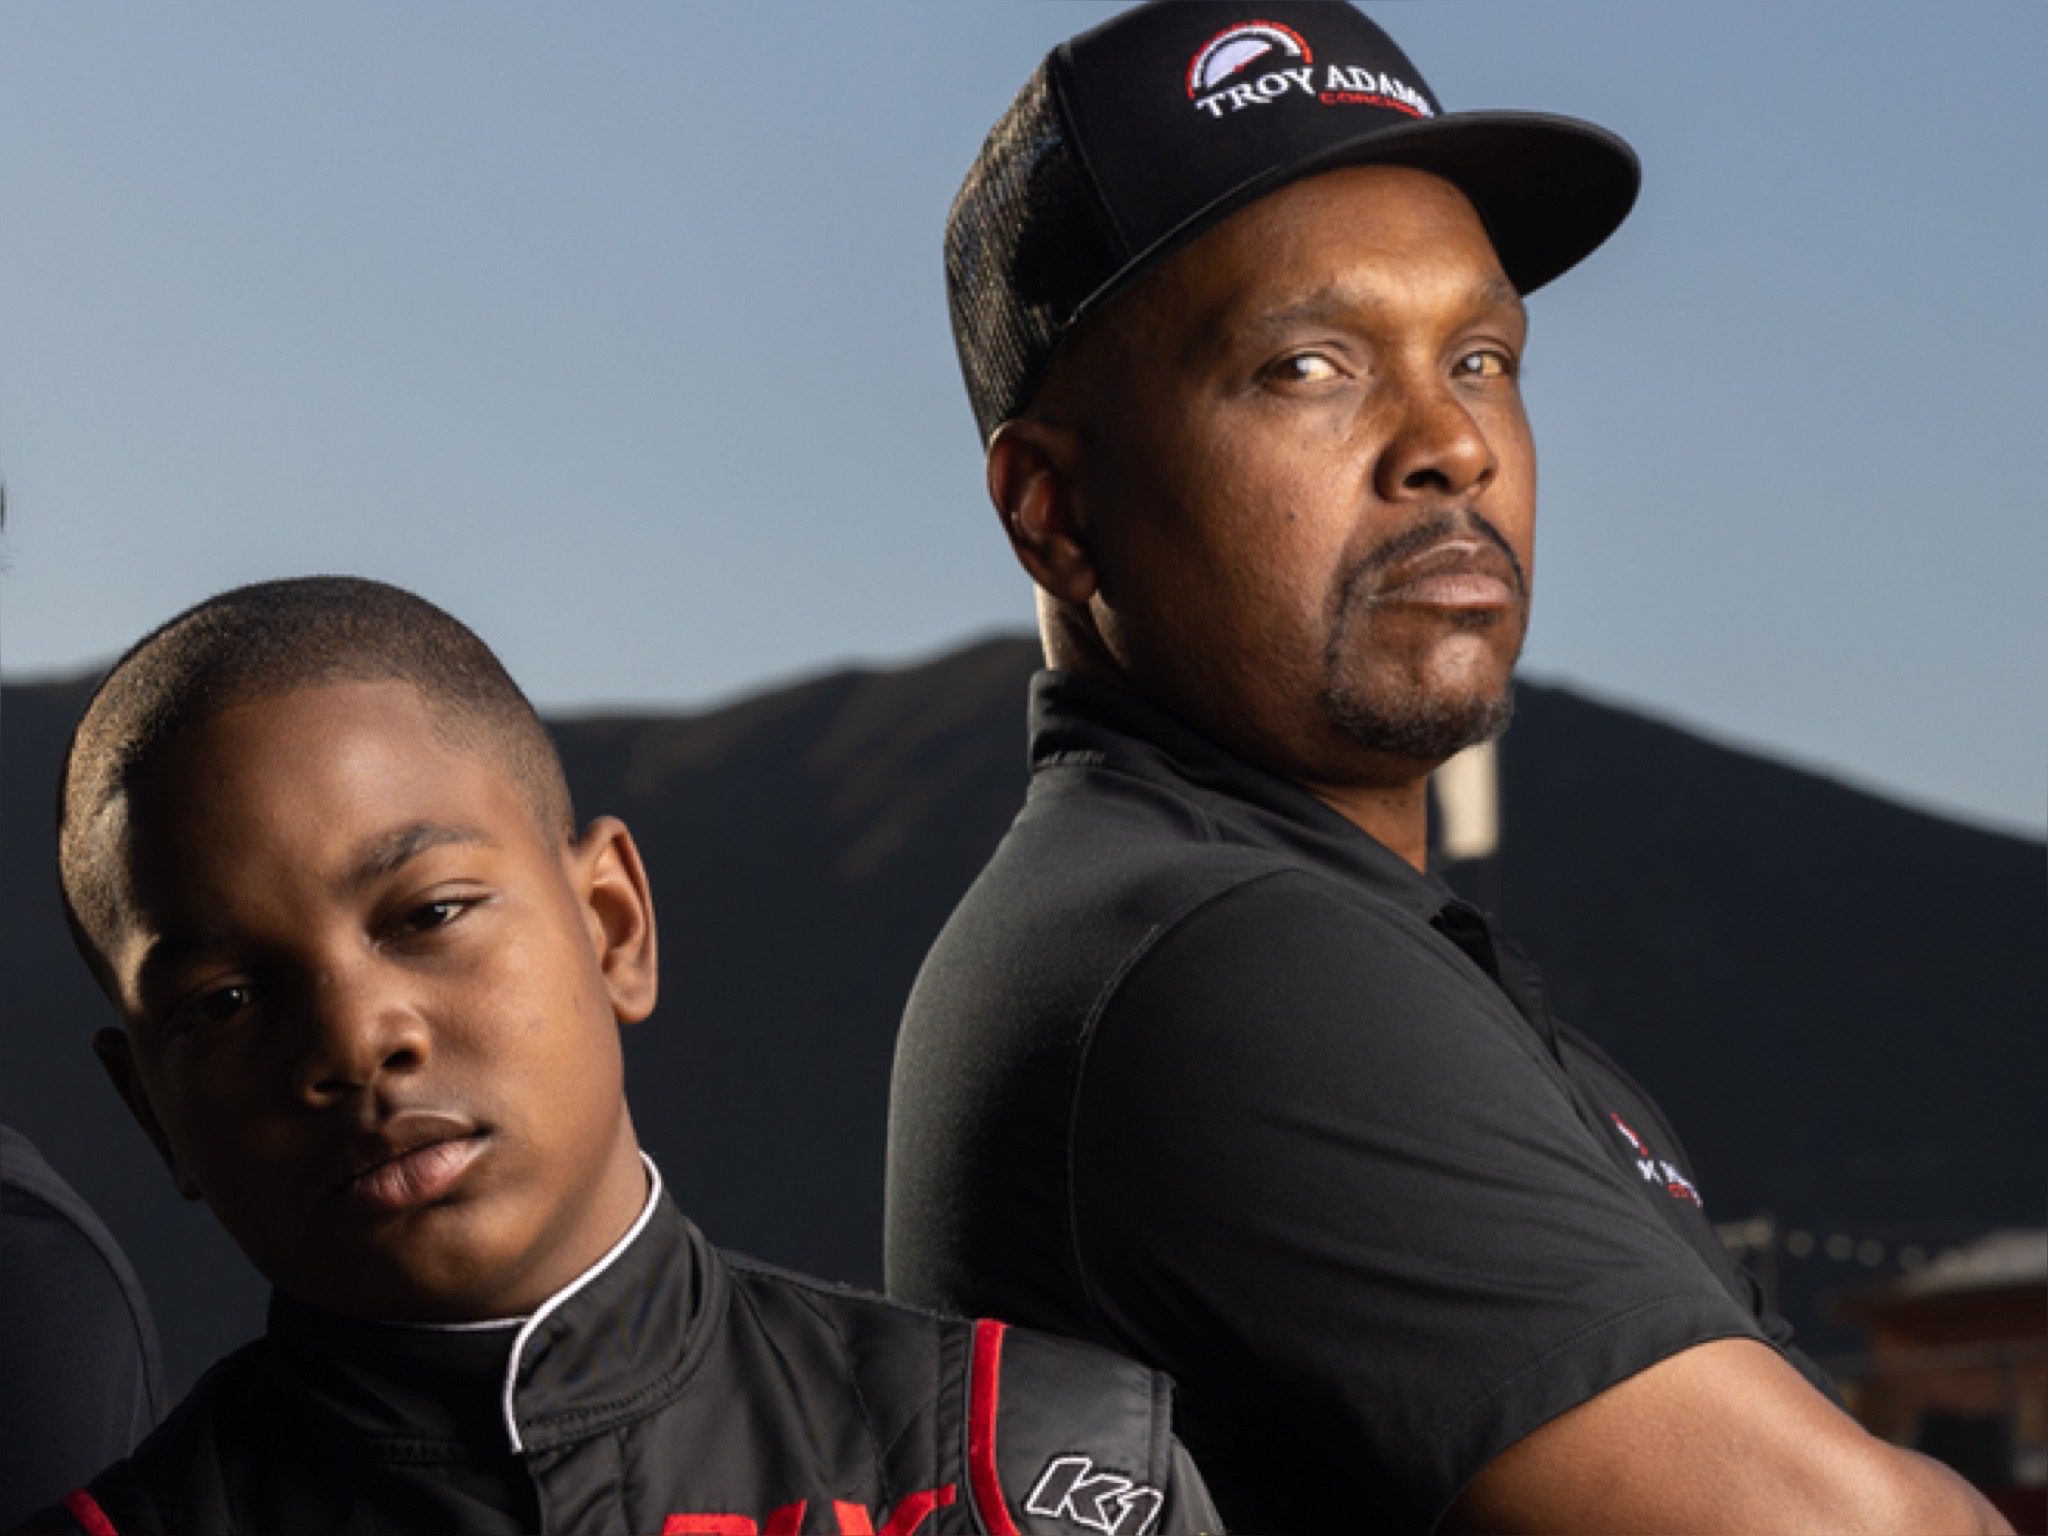 Father and son duo take competitive go-karting to another level